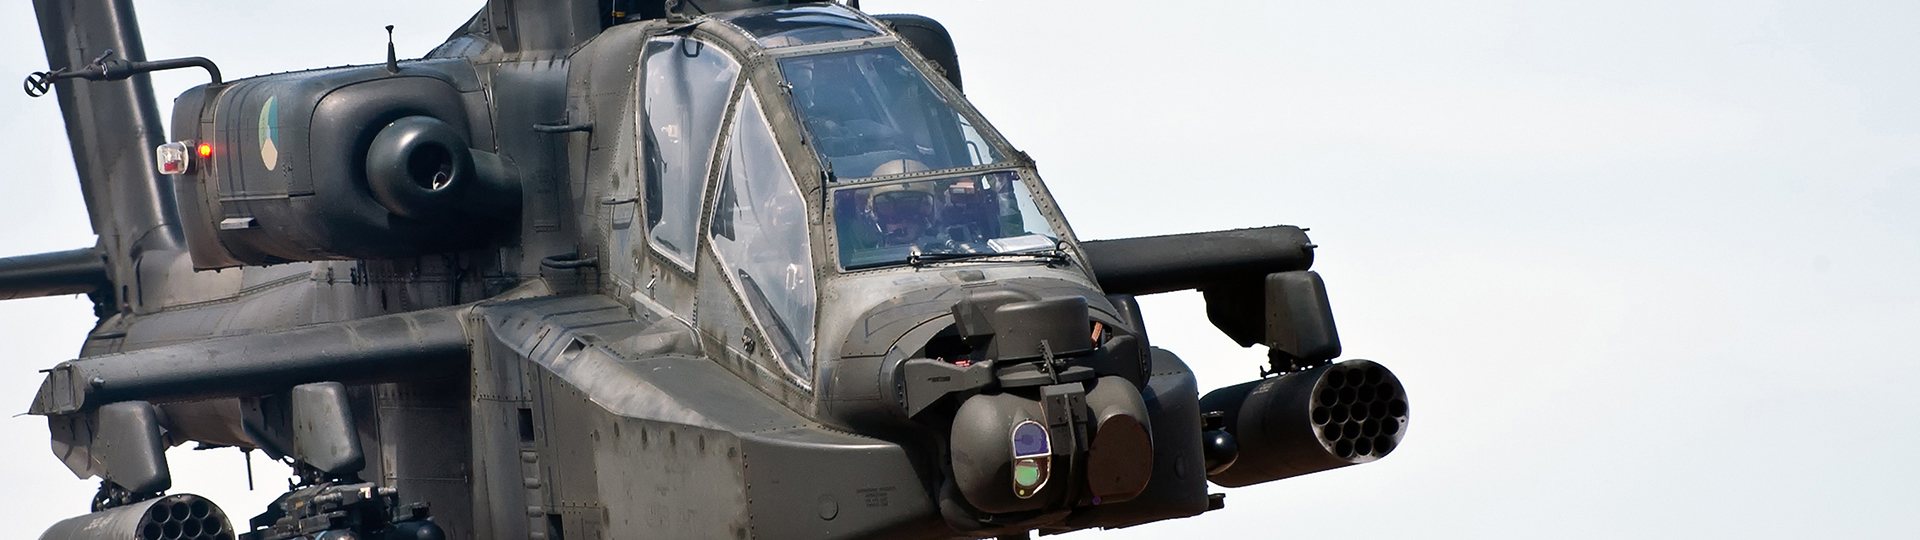 Boeing AH-64 Attack Helicopter